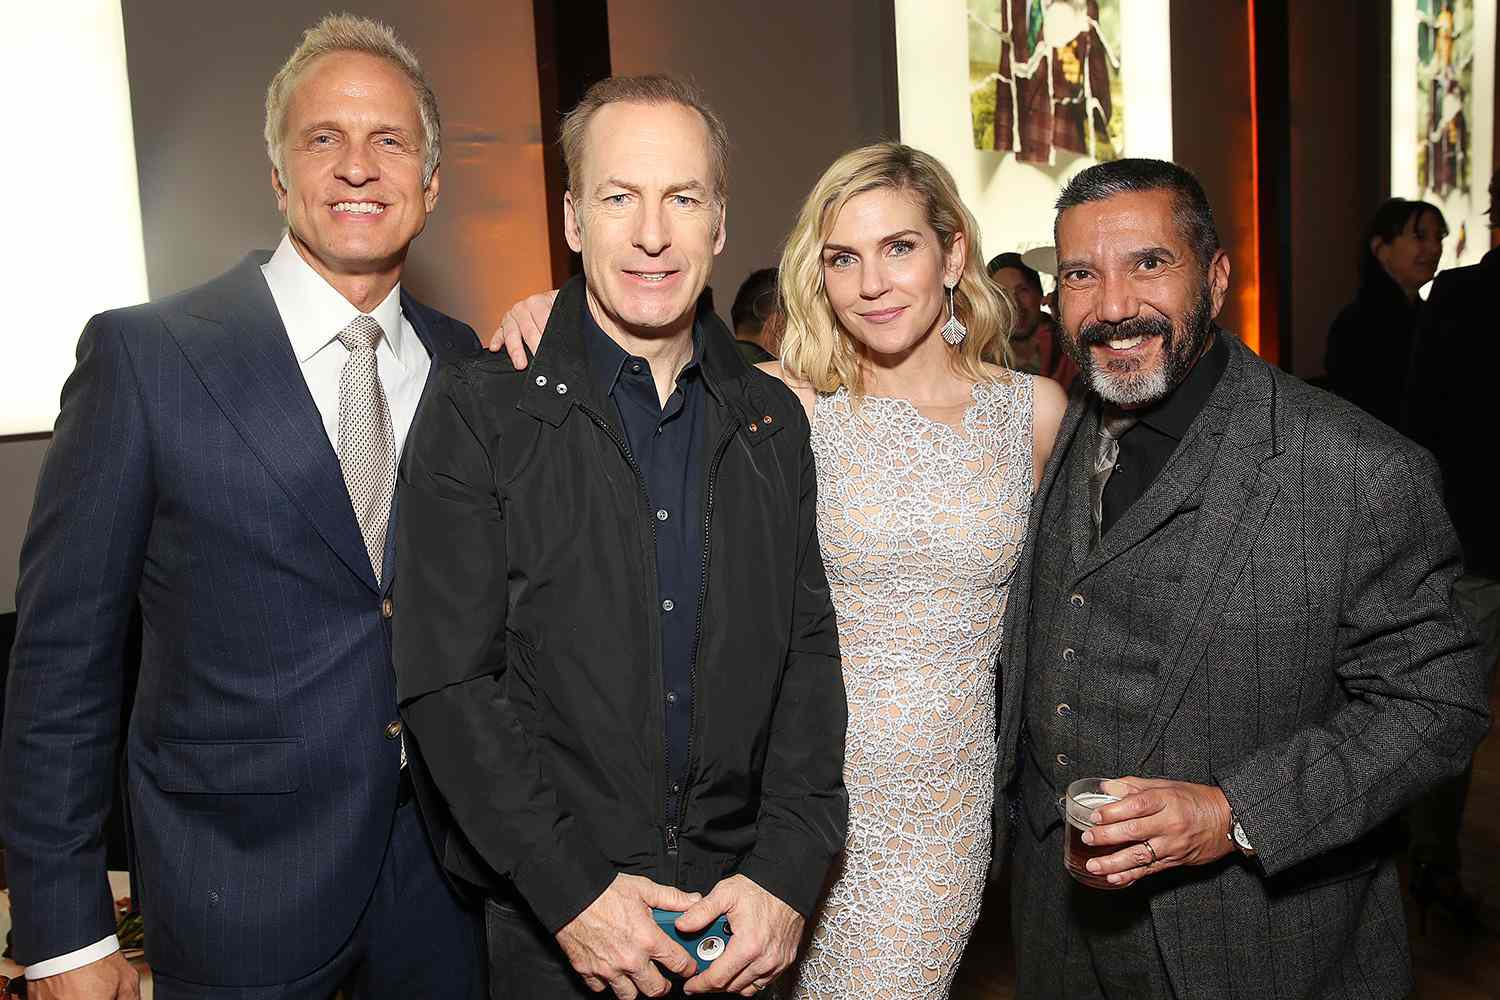 Patrick Fabian, Bob Odenkirk, Rhea Seehorn and Steven Michael Quezada attend the Premiere of AMC's "Better Call Saul" Season 5 After Party on February 05, 2020 in Los Angeles, California